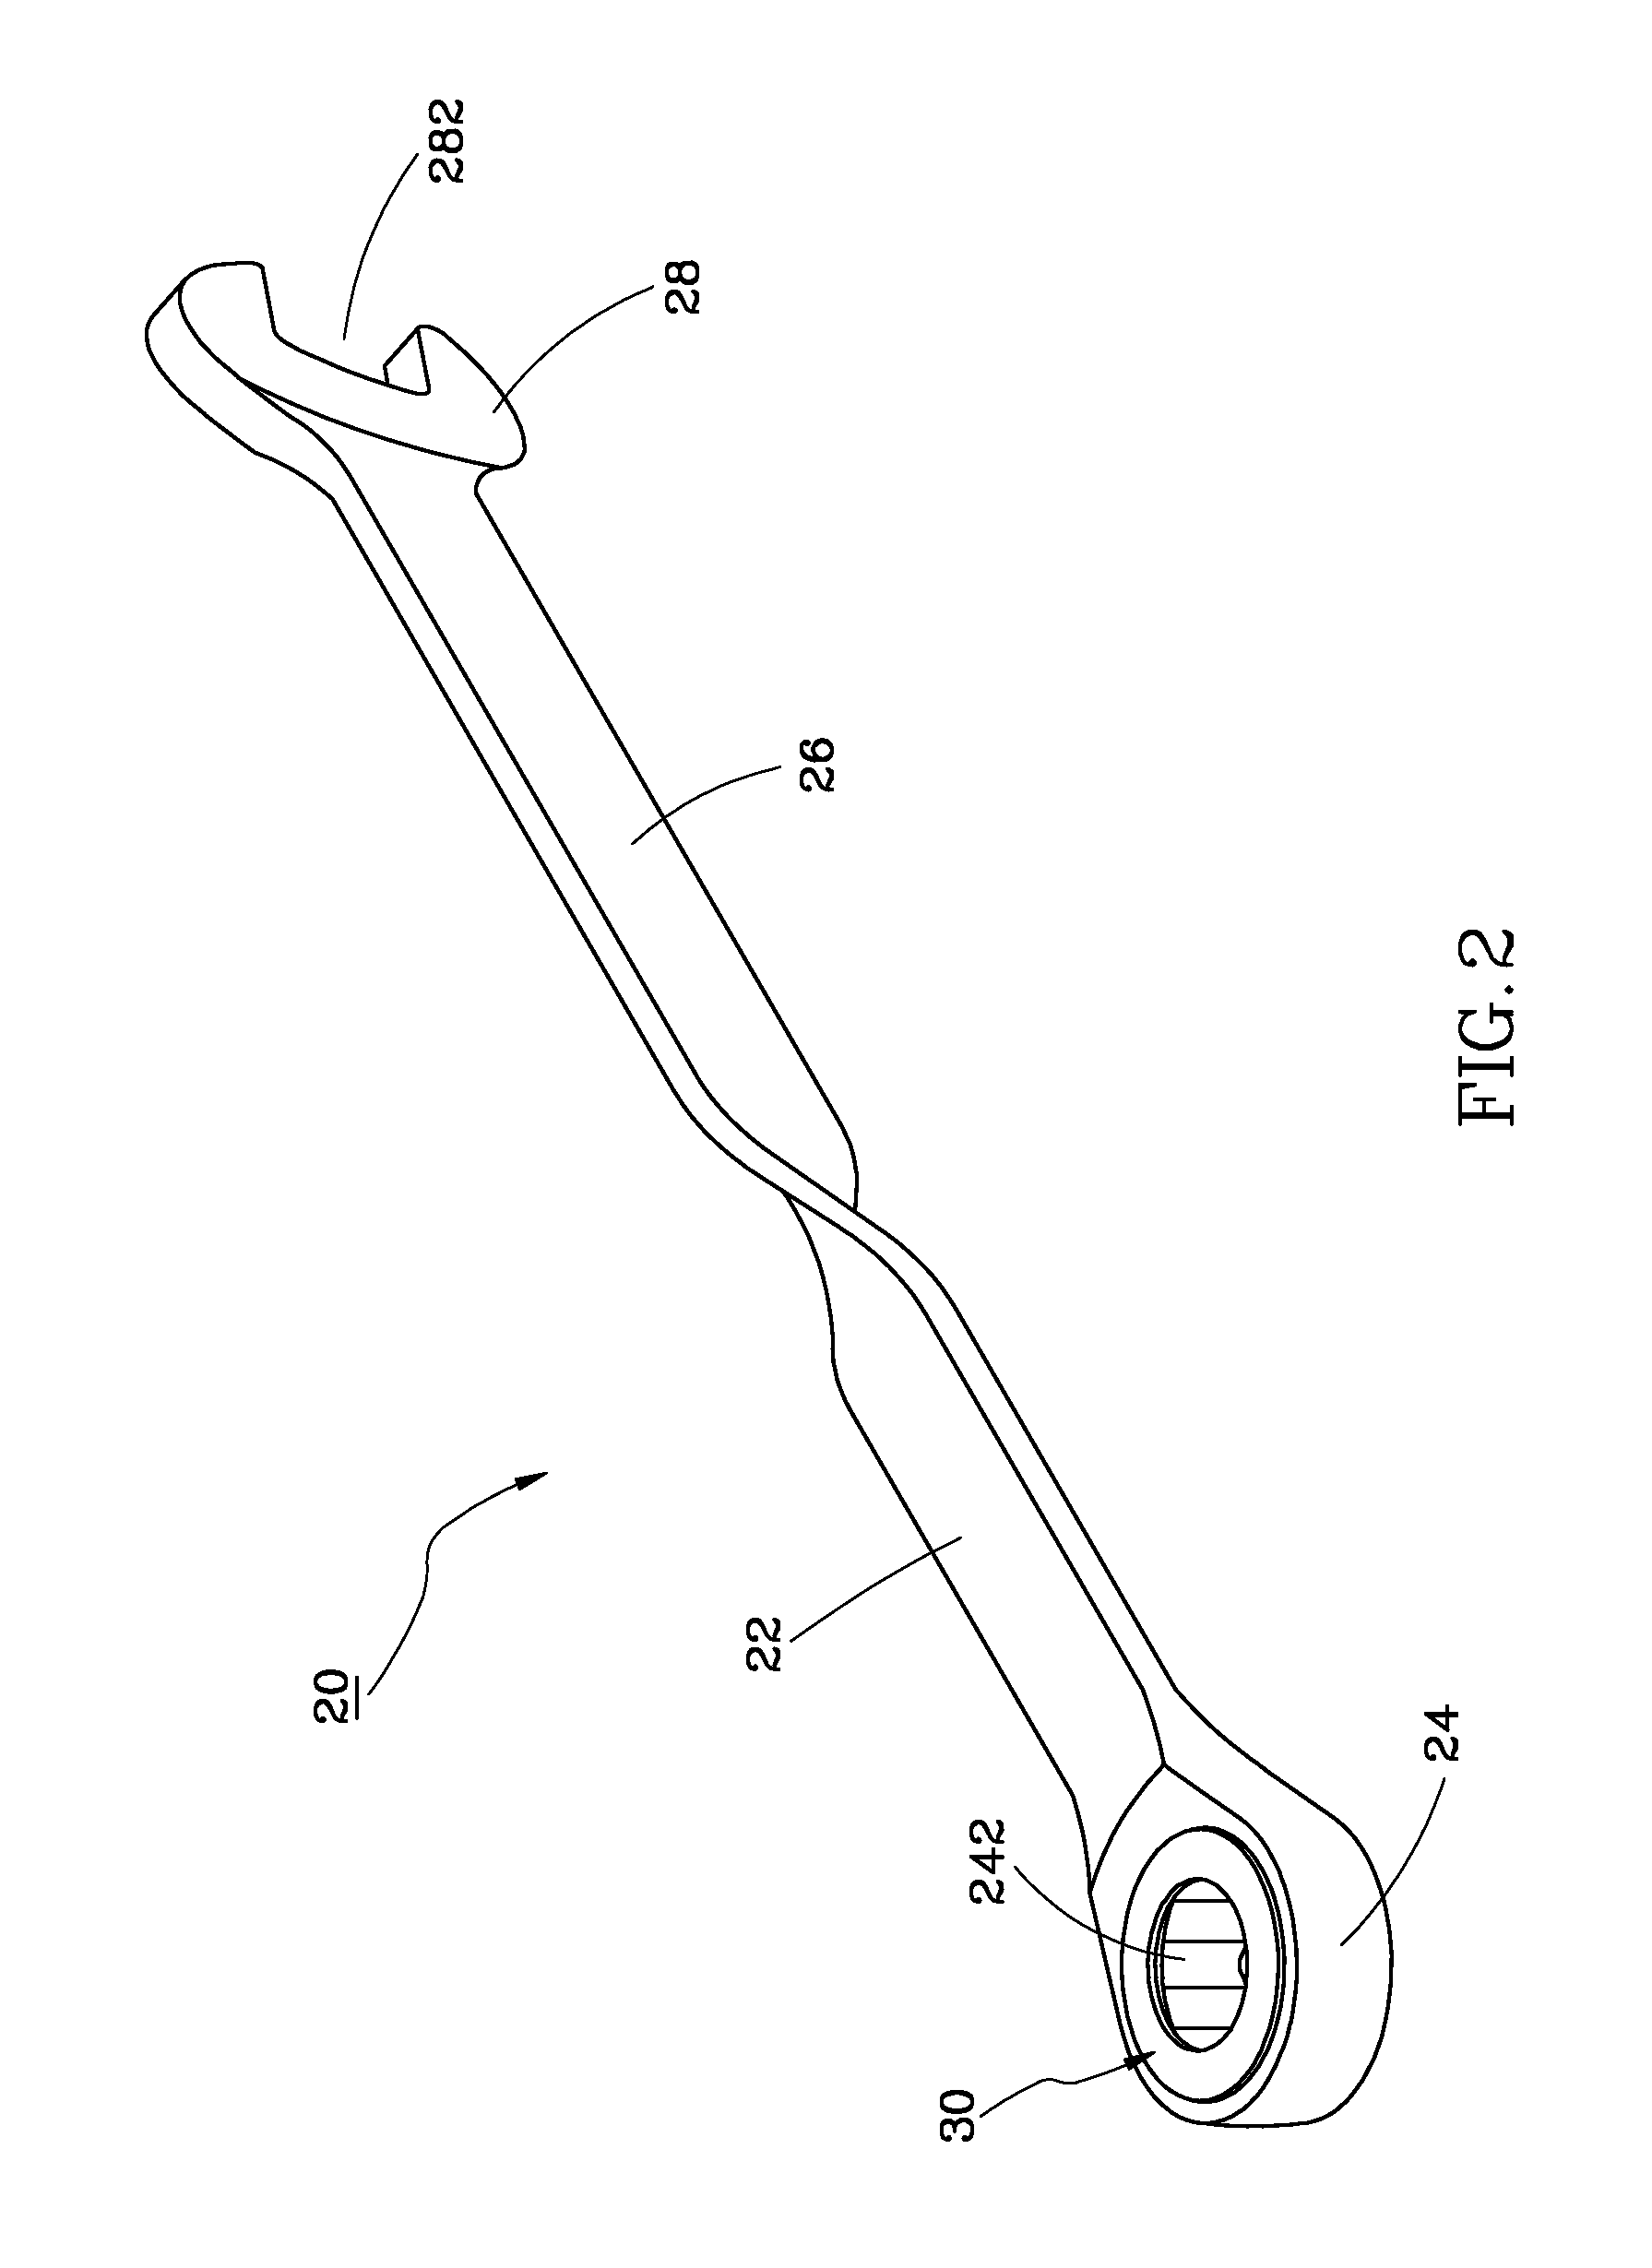 Wrench with ergonomic twisted handle